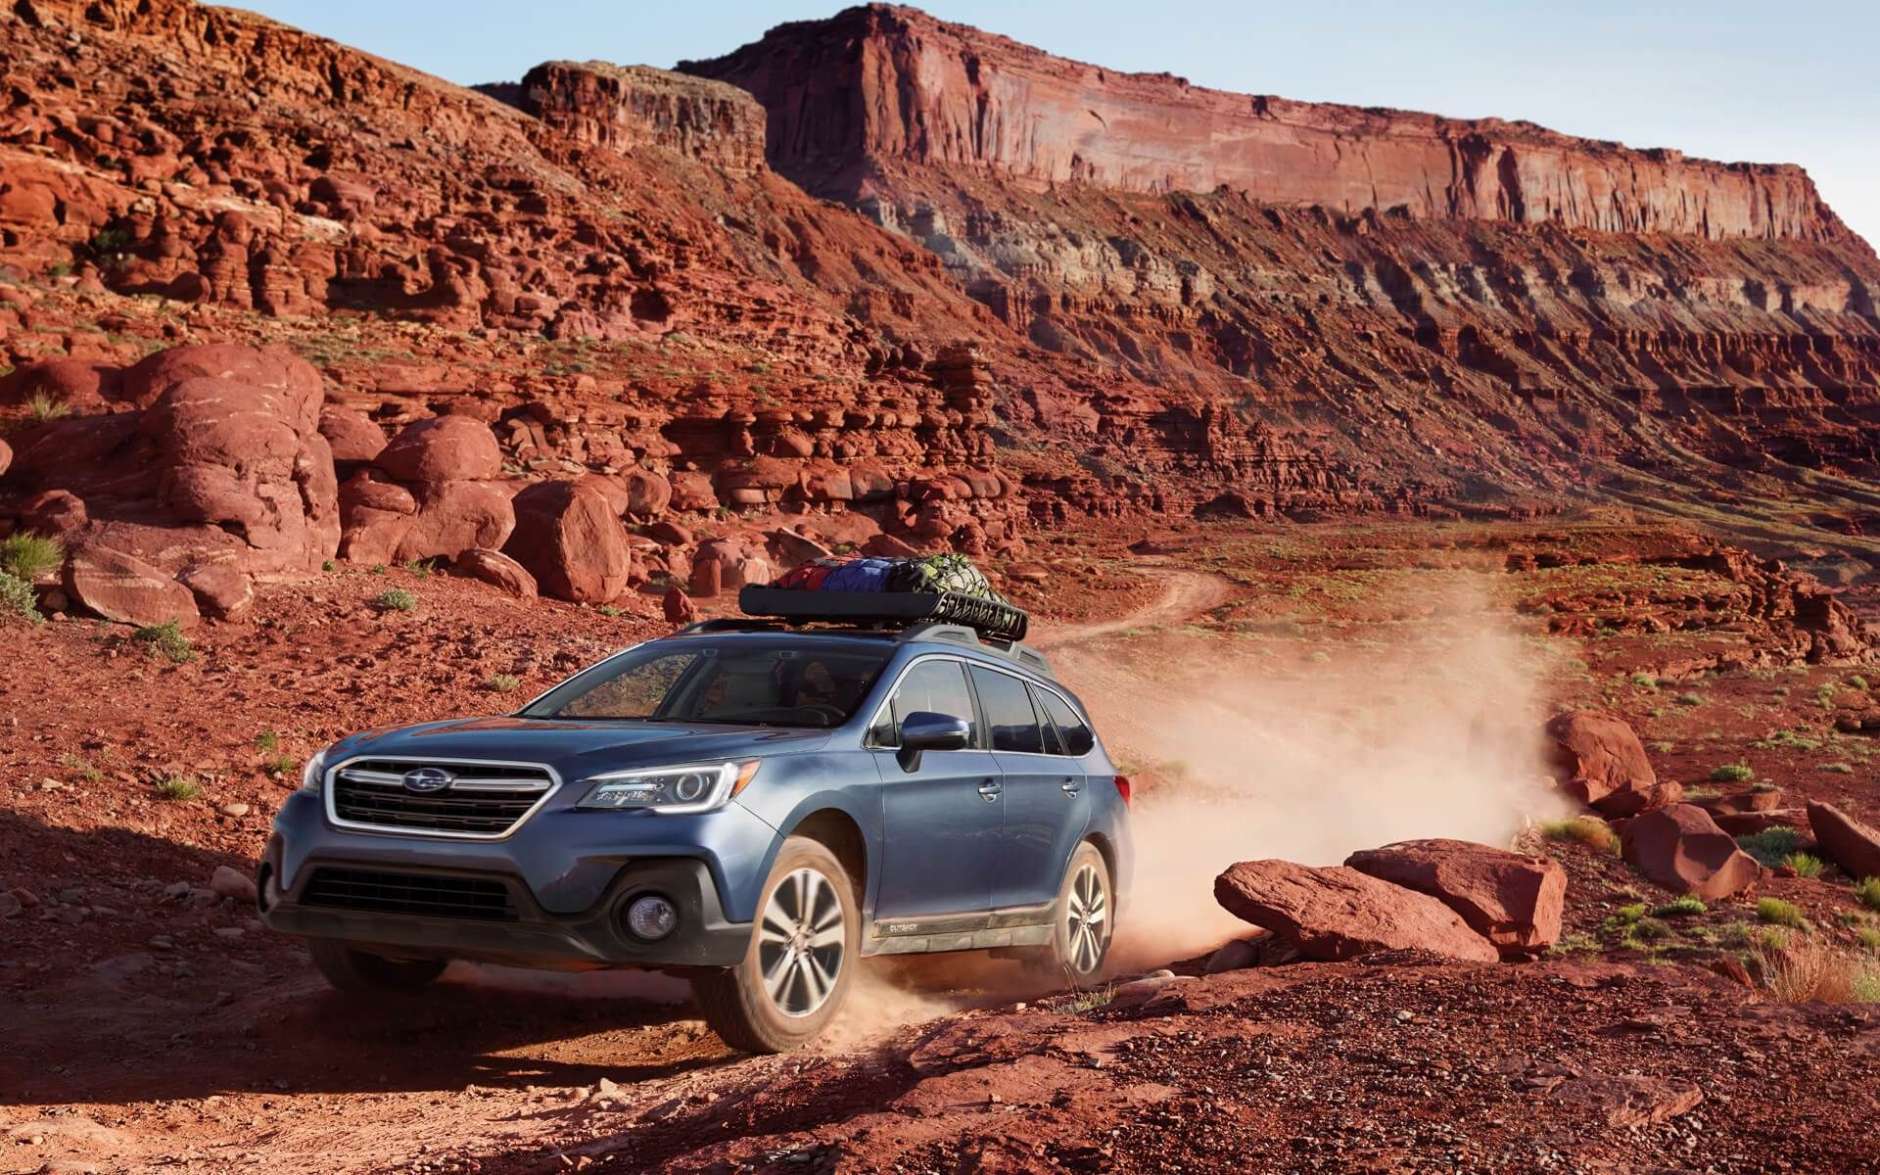 The Subaru Outback is a Top Safety Pick+ winner. (Courtesy Subaru)